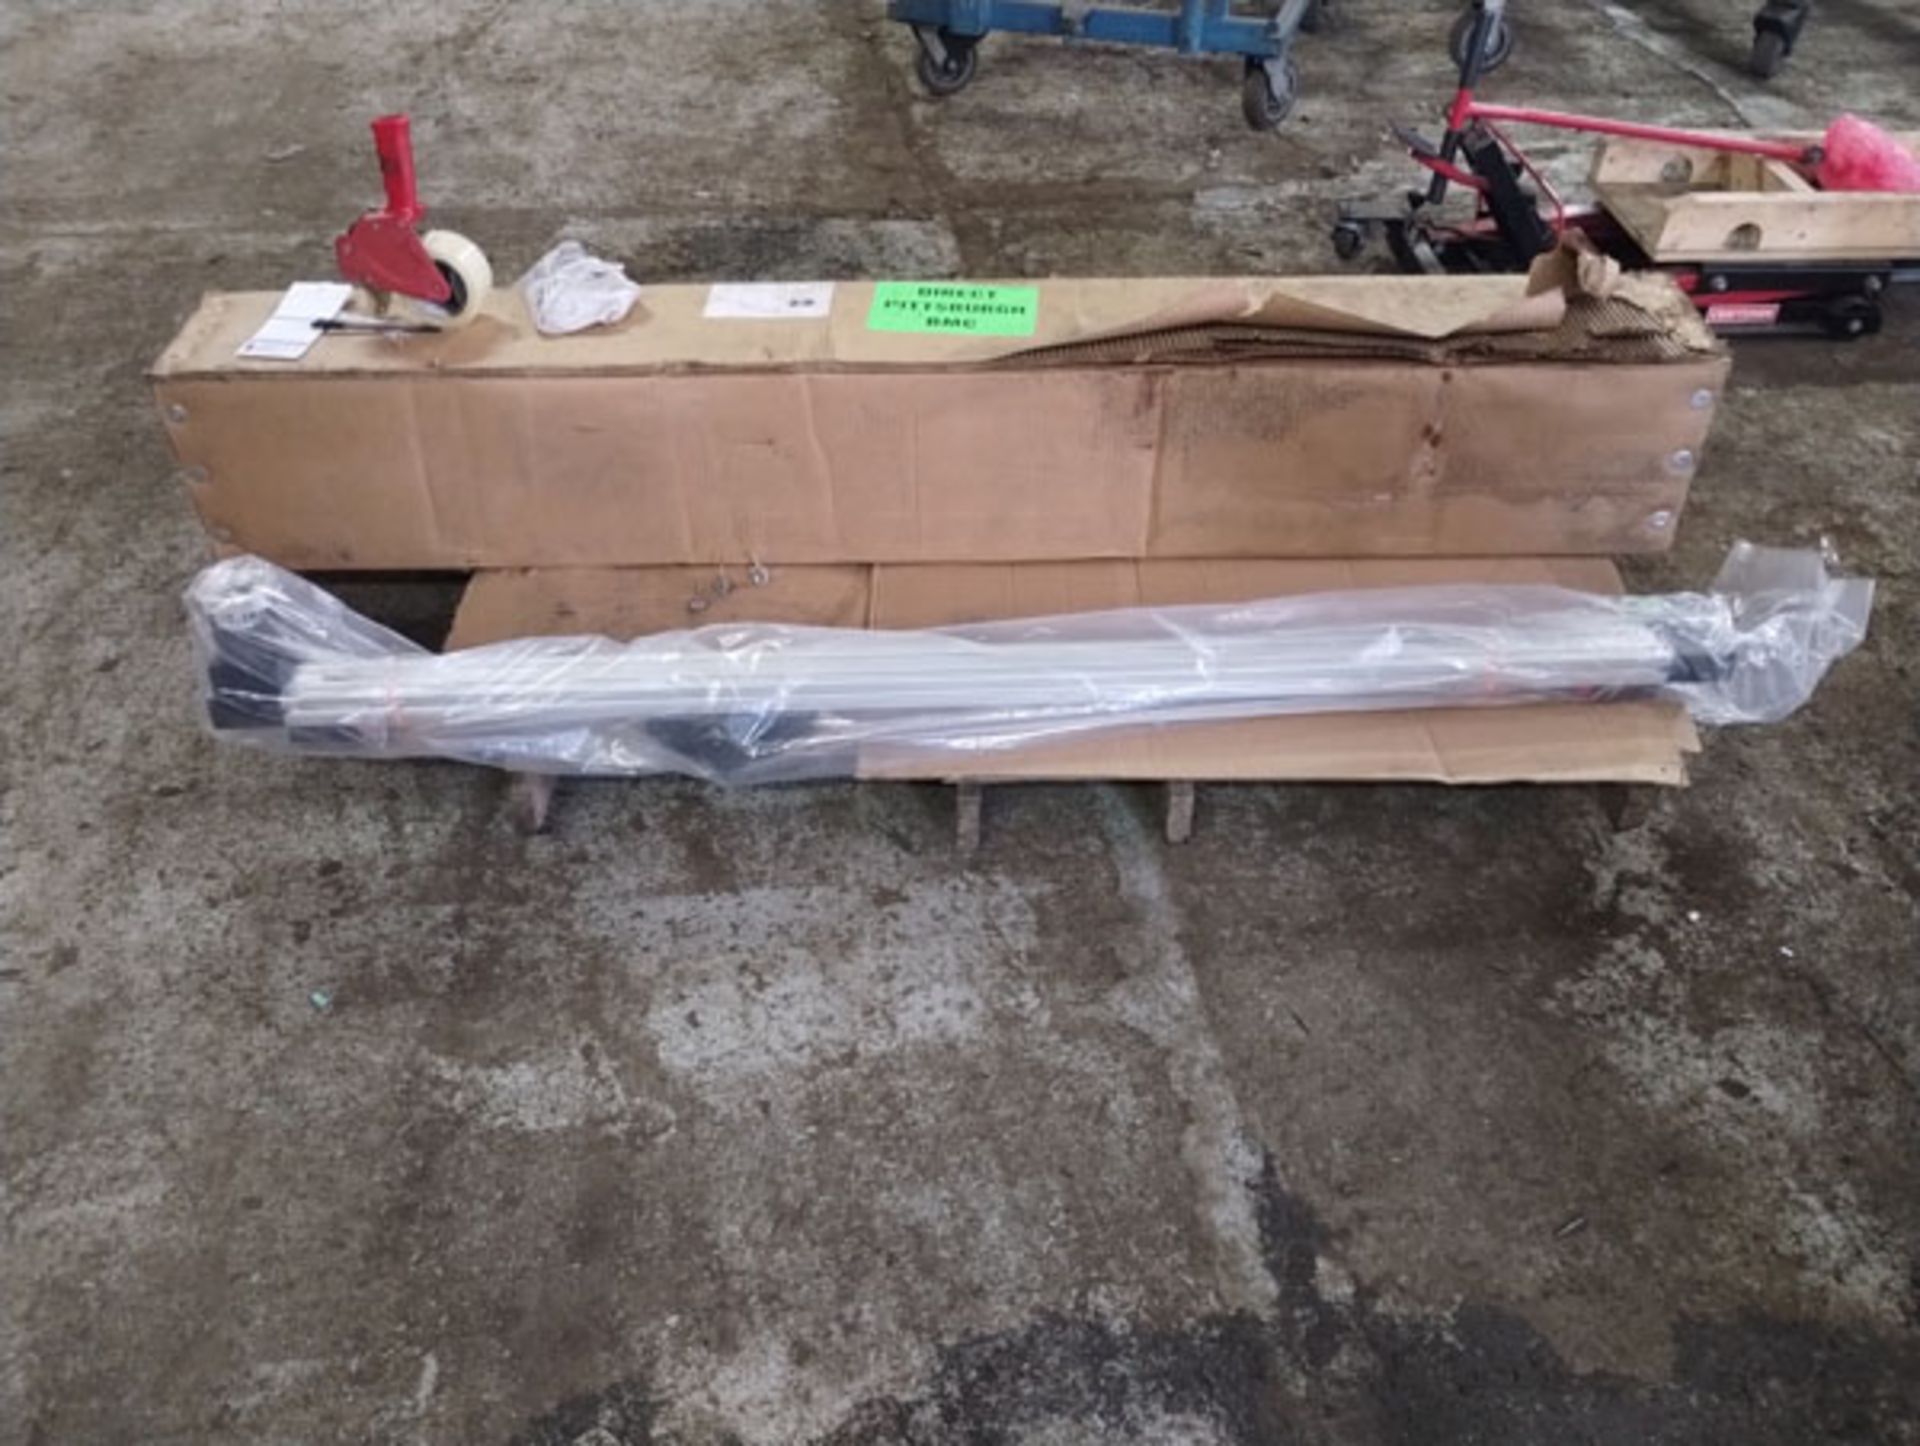 70" LINEAR ACTUATOR PART# 10764A01 -- Lot located at second location: 6800 Union ave. , Cleveland